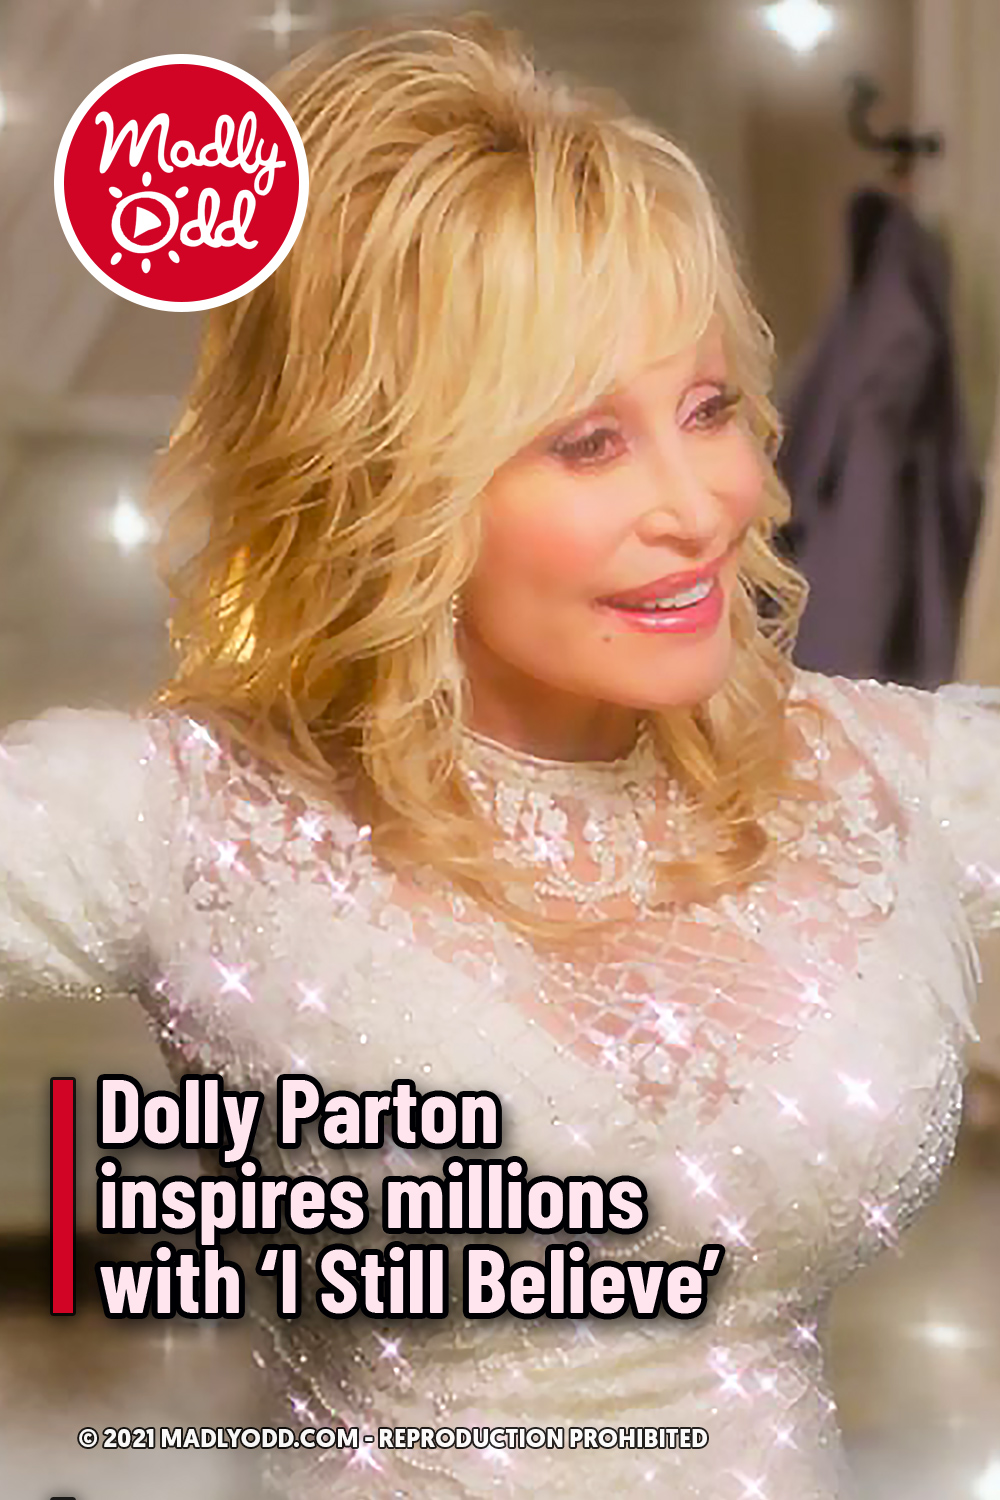 Dolly Parton inspires millions with ‘I Still Believe’